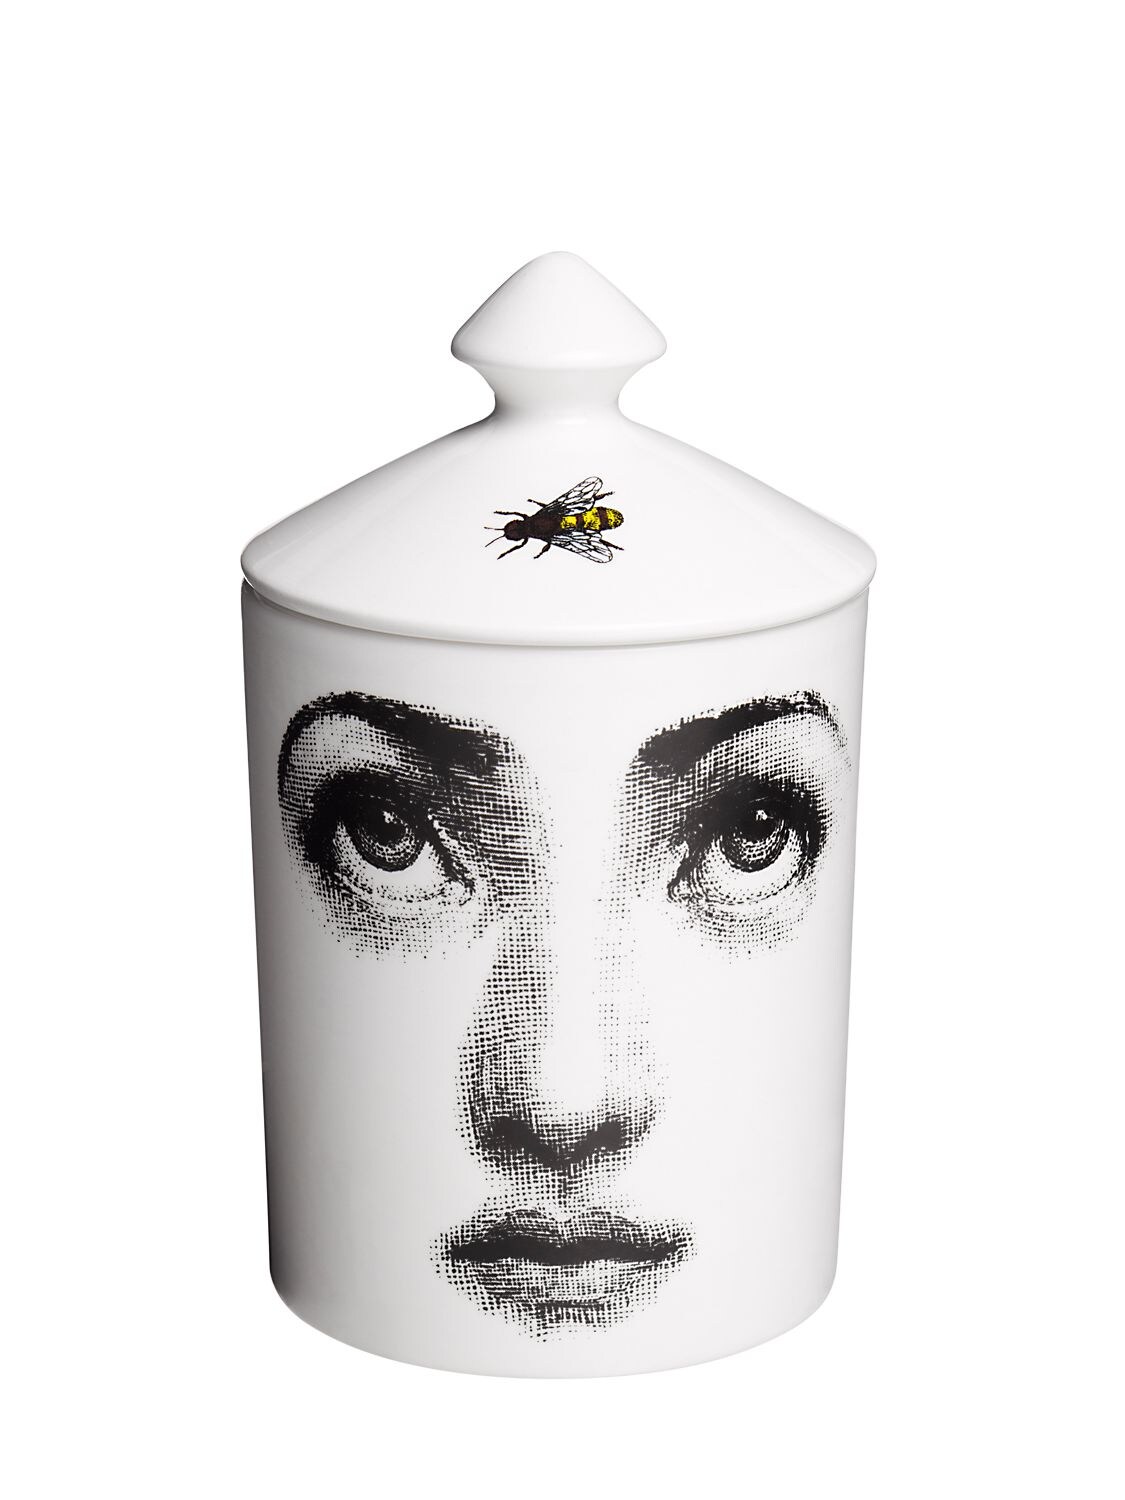 FORNASETTI L'APE OTTO SCENTED CANDLE WITH LID,69IWUZ002-V0HJVEUVQKXBQ0S1